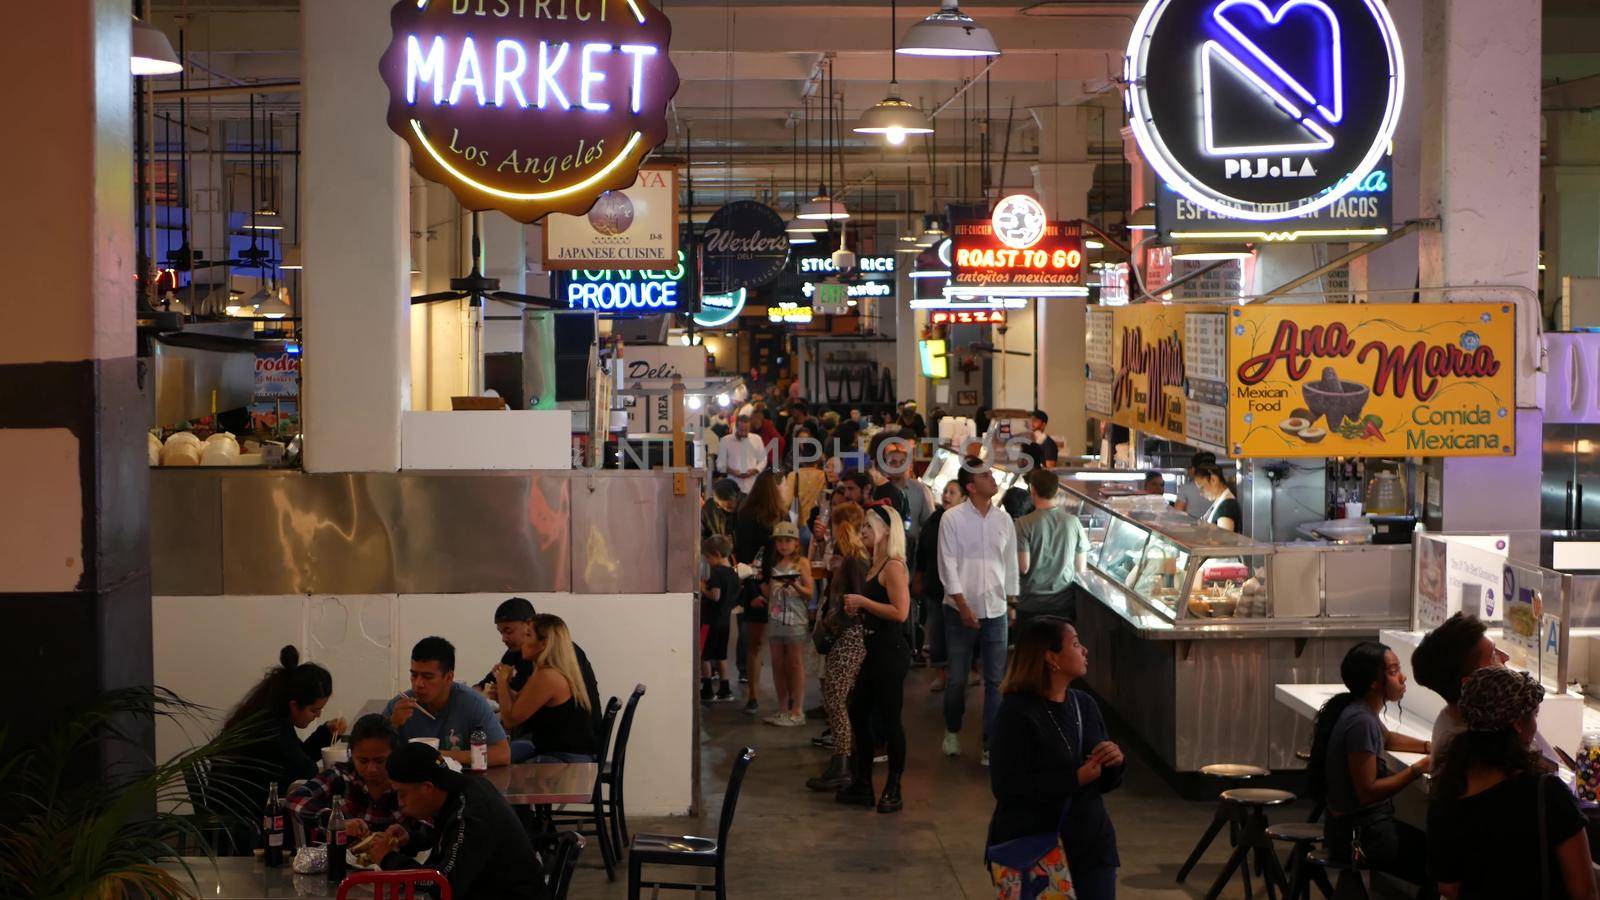 LOS ANGELES, CALIFORNIA, USA - 27 OCT 2019: Grand central market street lunch shops with diversity of glowing retro neon signs. Multiracial people on foodcourt. Citizens dining with fast food in LA.